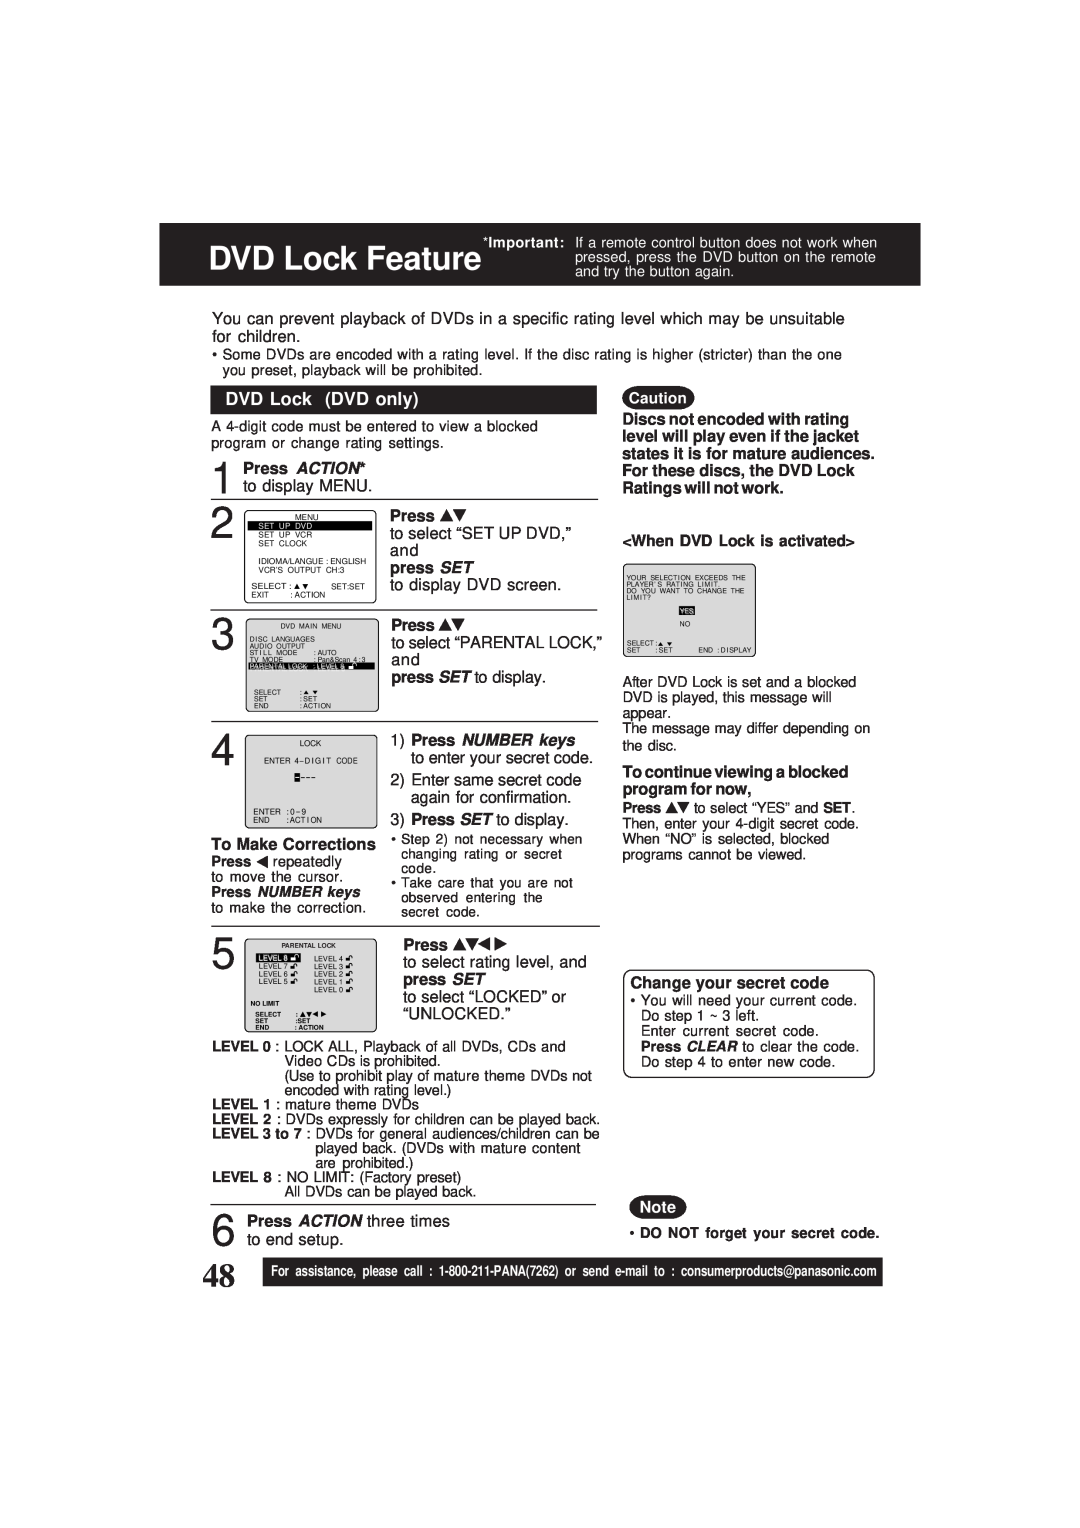 Panasonic PV-D4761 DVD Lock DVD only, Press ACTION, press SET, When DVD Lock is activated, To Make Corrections 